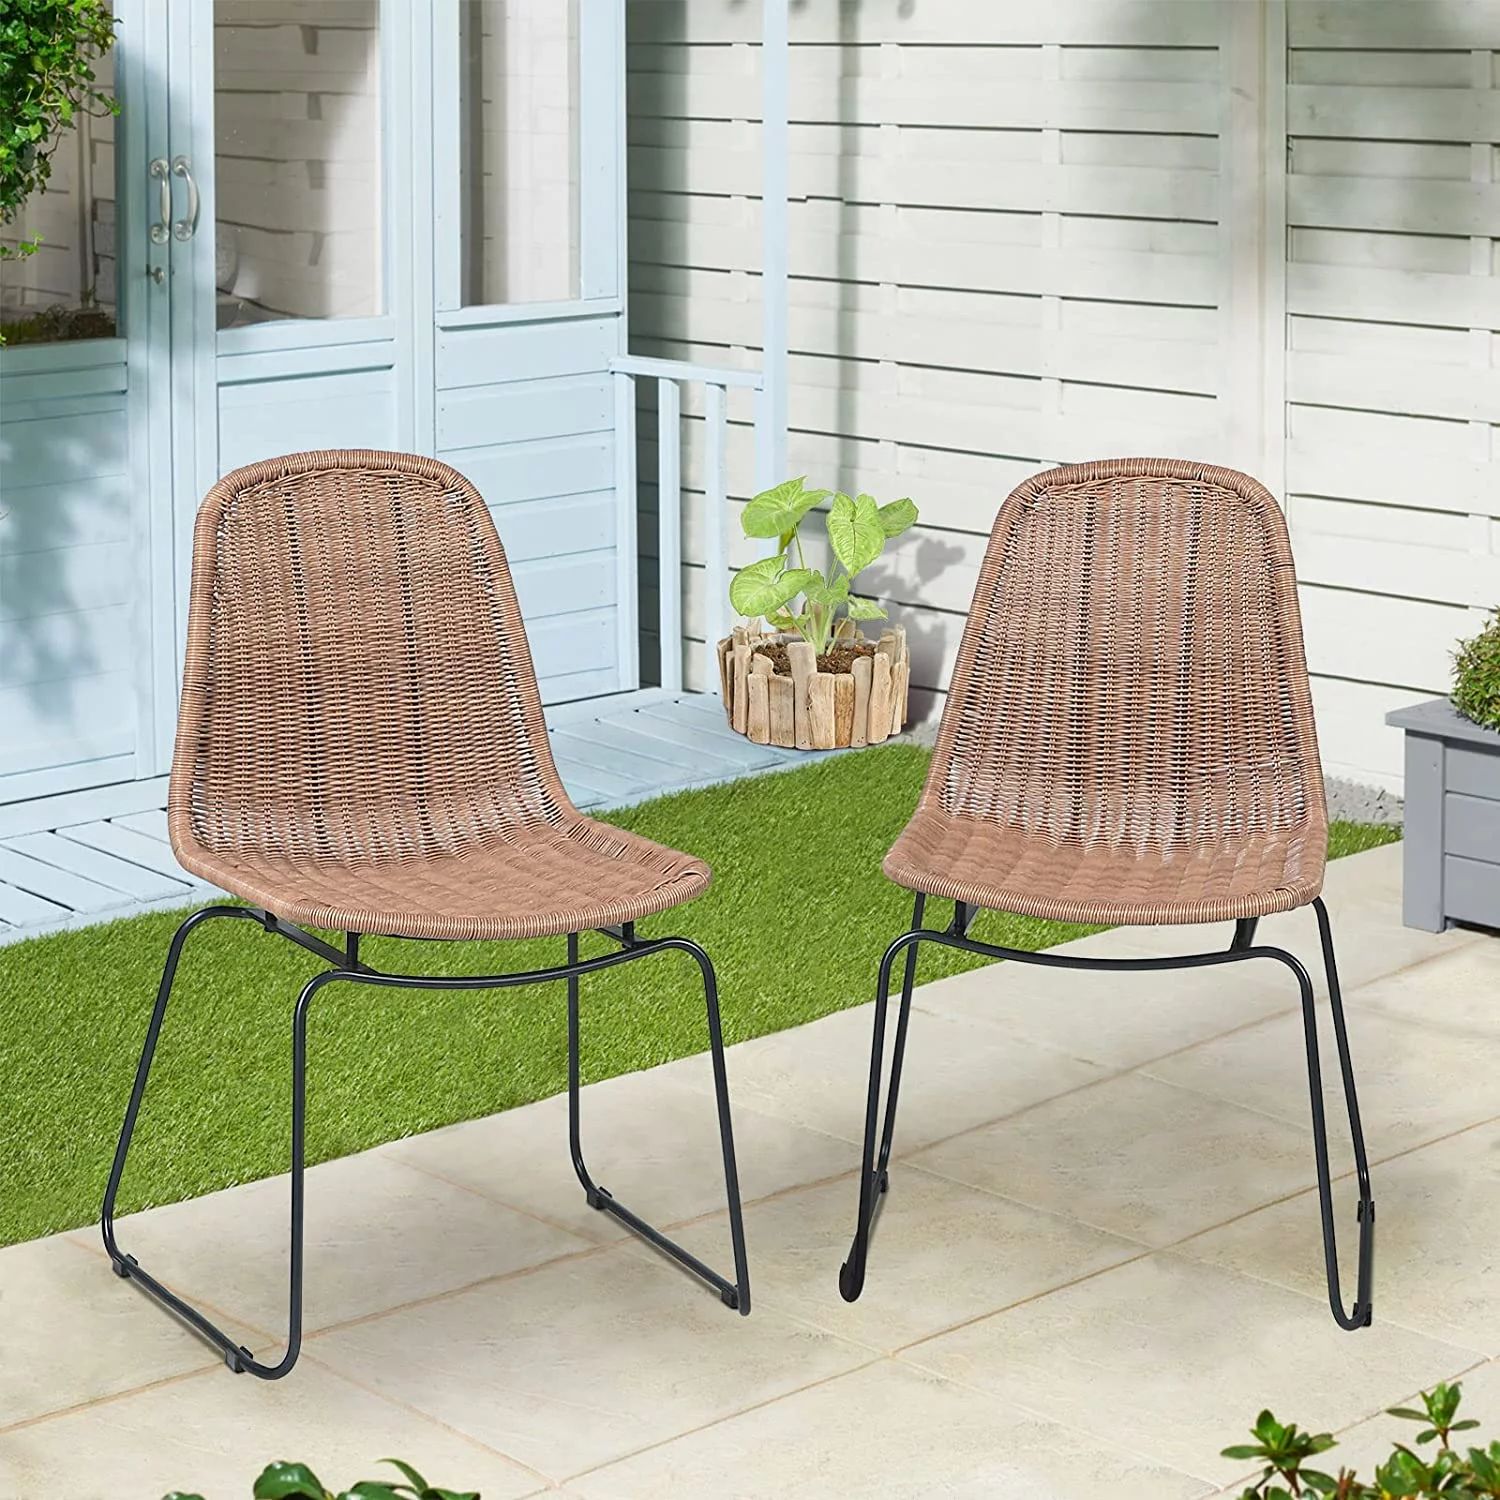 Outdoor Wicker Chairs, Patio Dining Chair, Rattan Armless Chairs with Curved Back, Indoor/Outdoor... | Walmart (US)